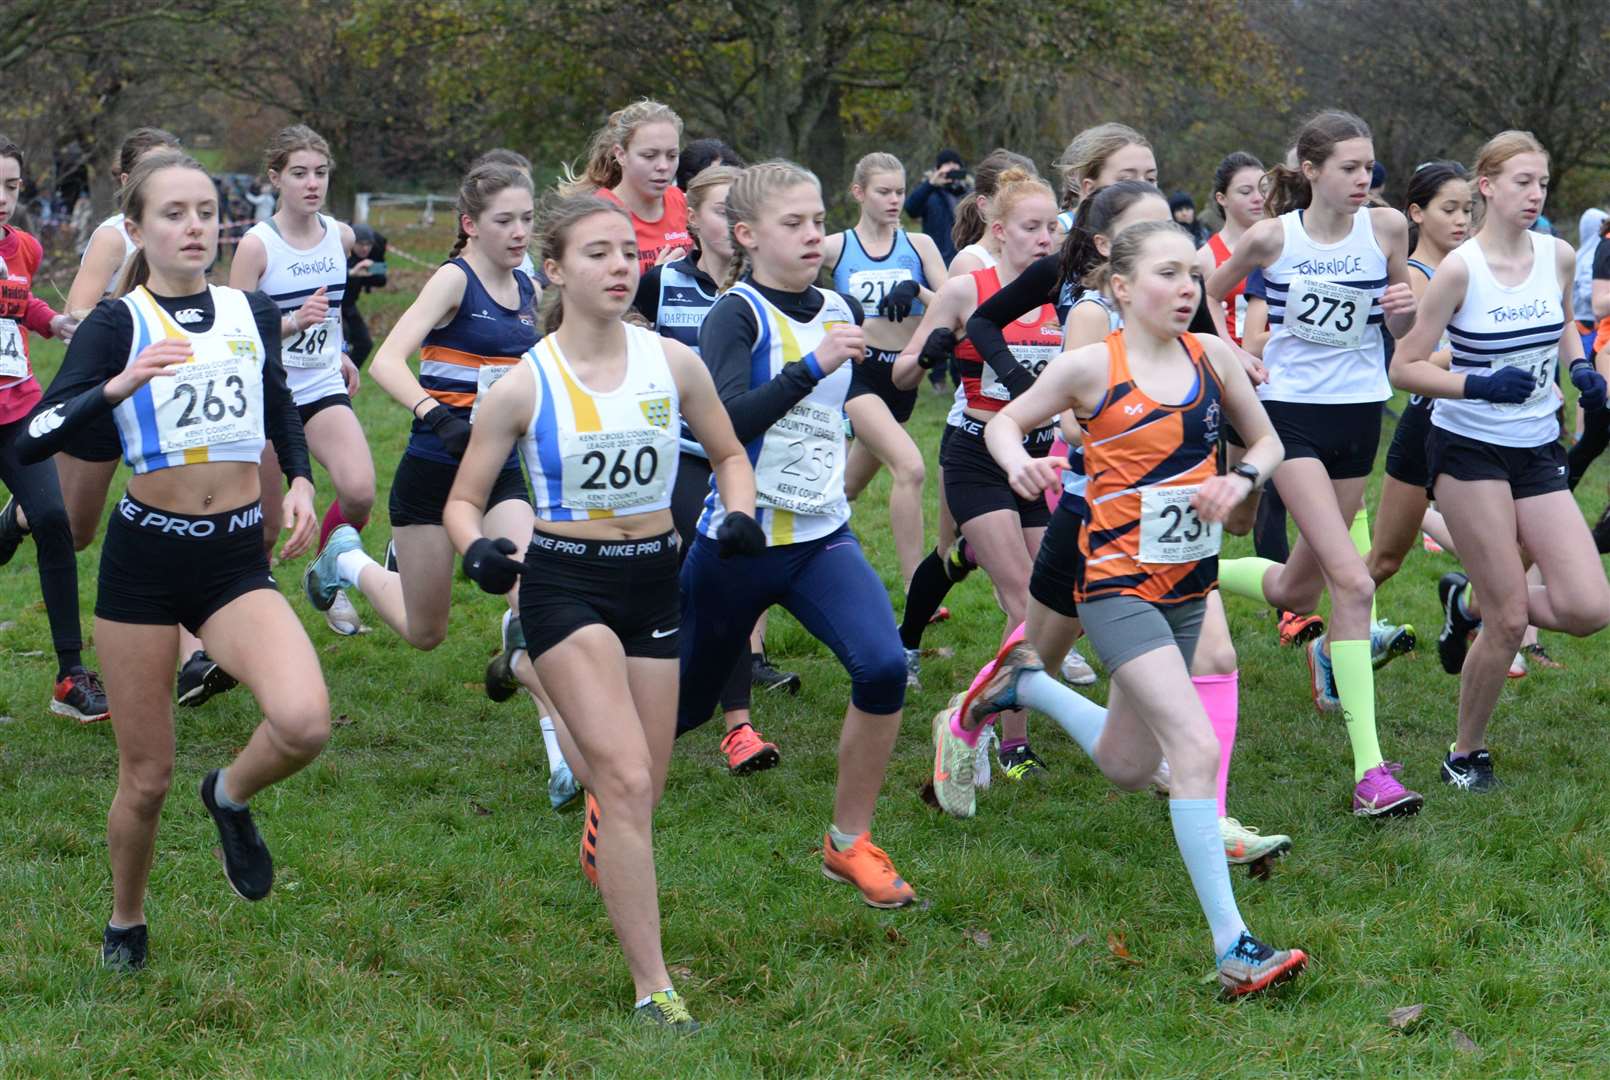 The under-15 girls jostle for position at the start of their race. Picture: Chris Davey (53364428)